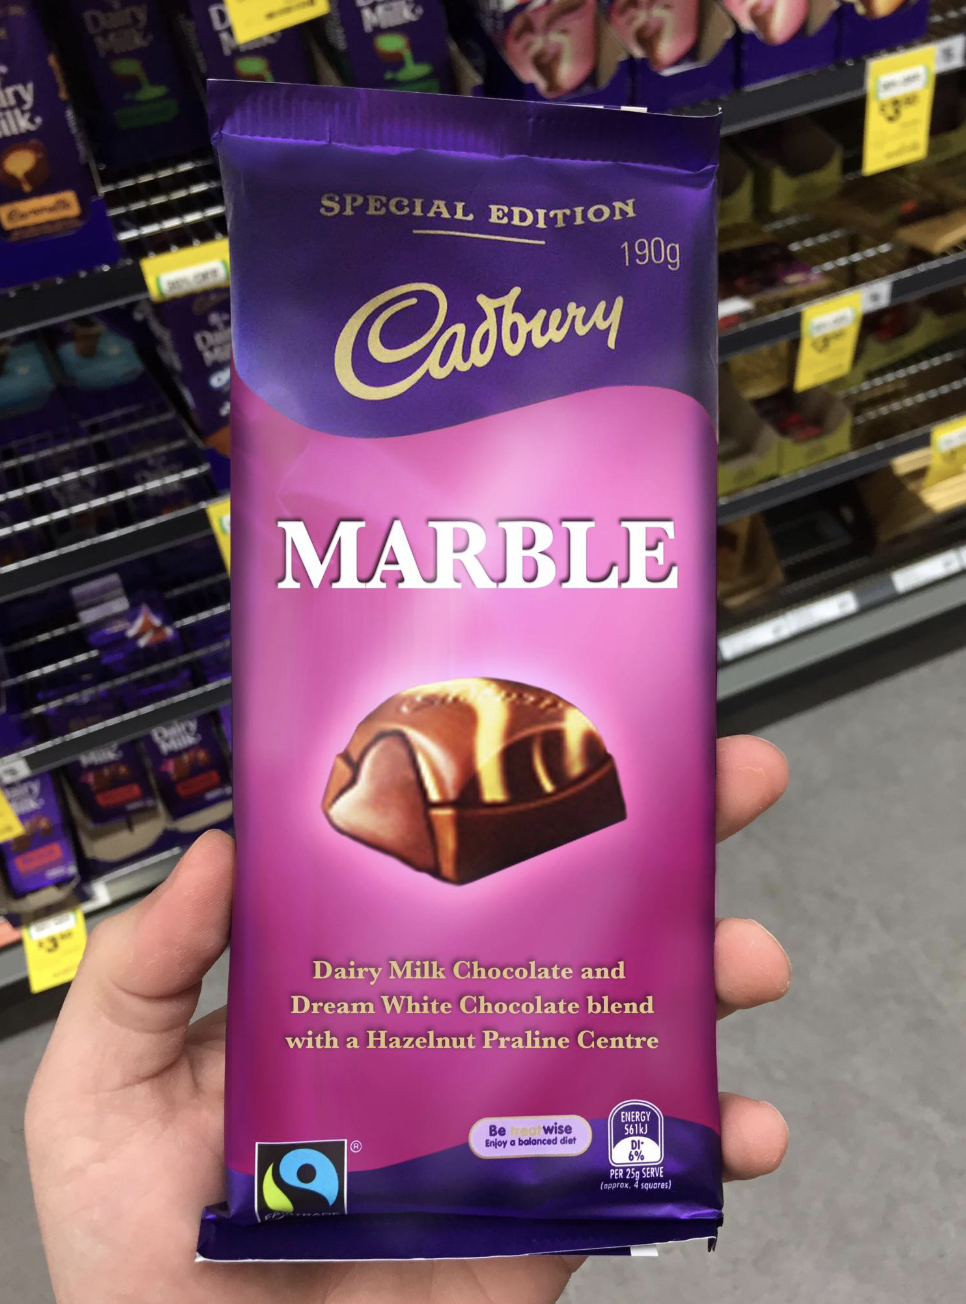 Chocolate bars that don't exist 5